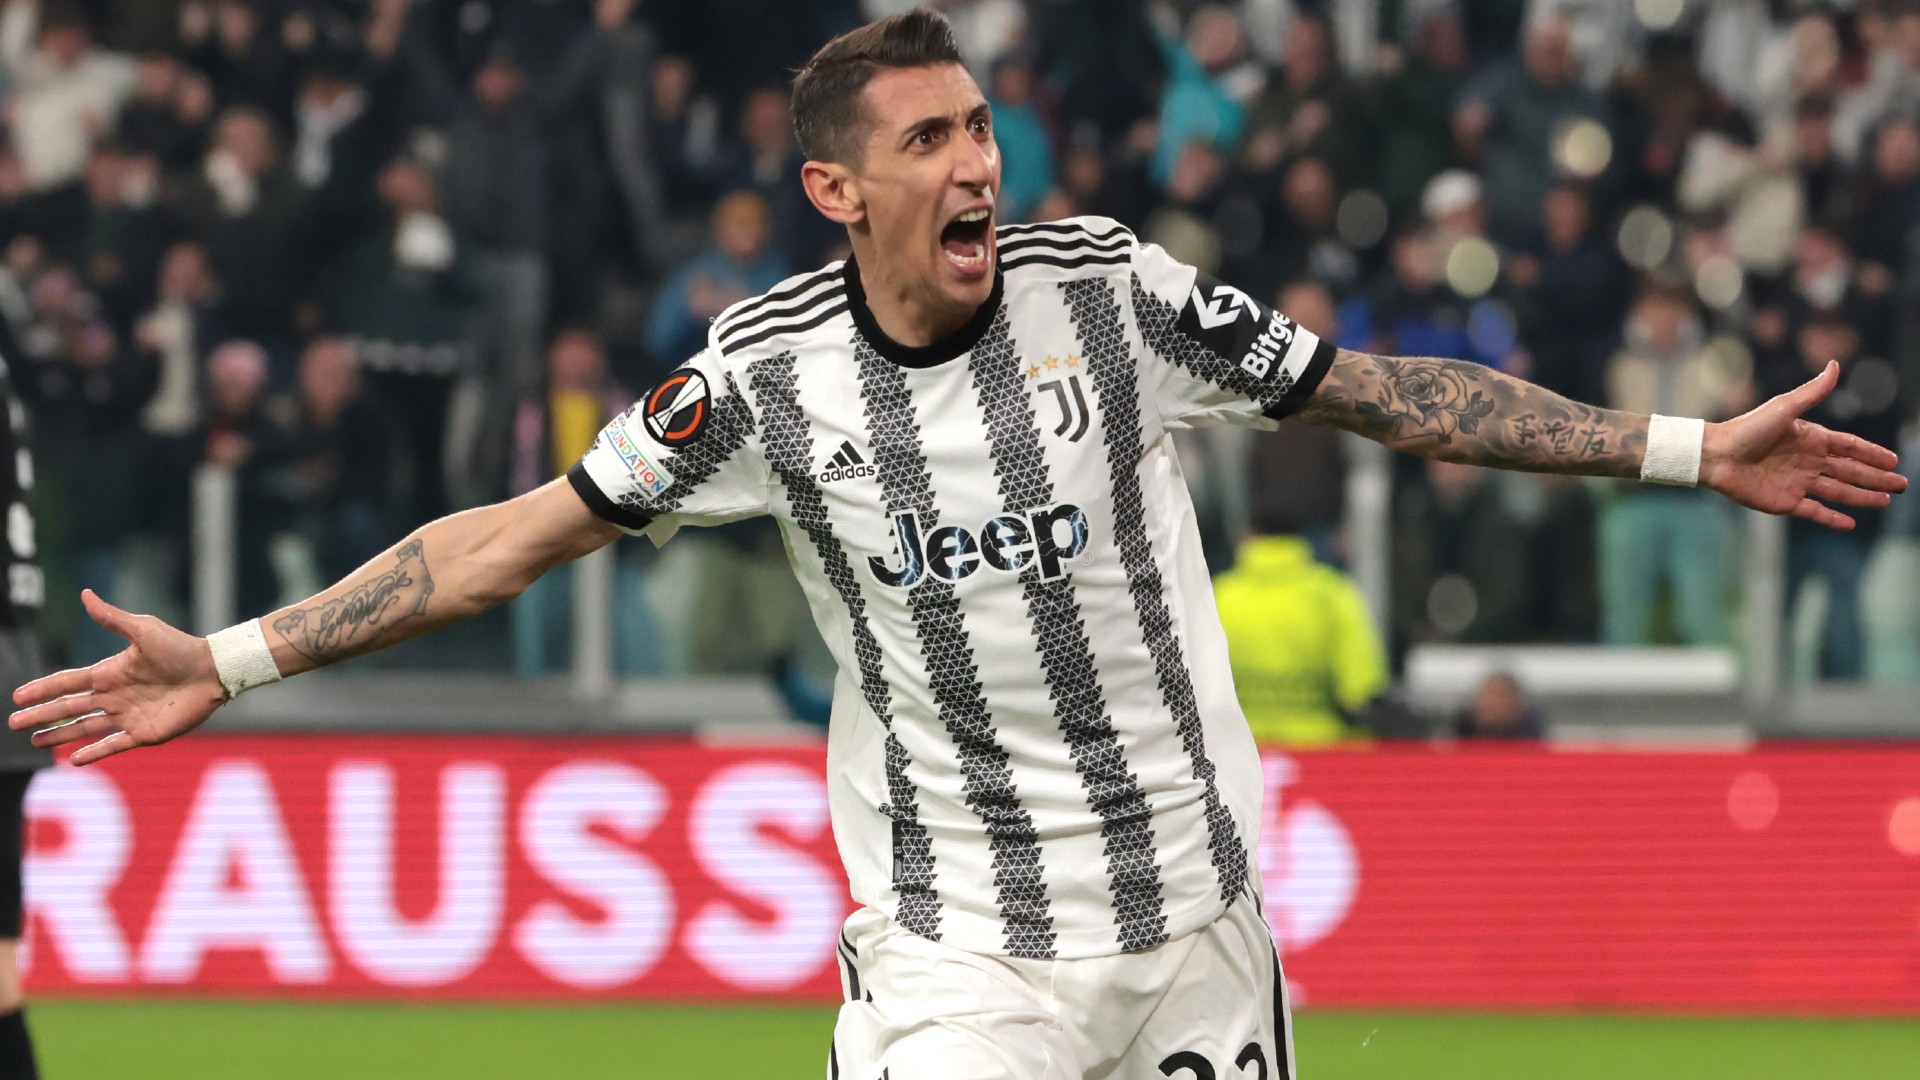 Match-winner Di Maria in contract talks with J beIN SPORTS